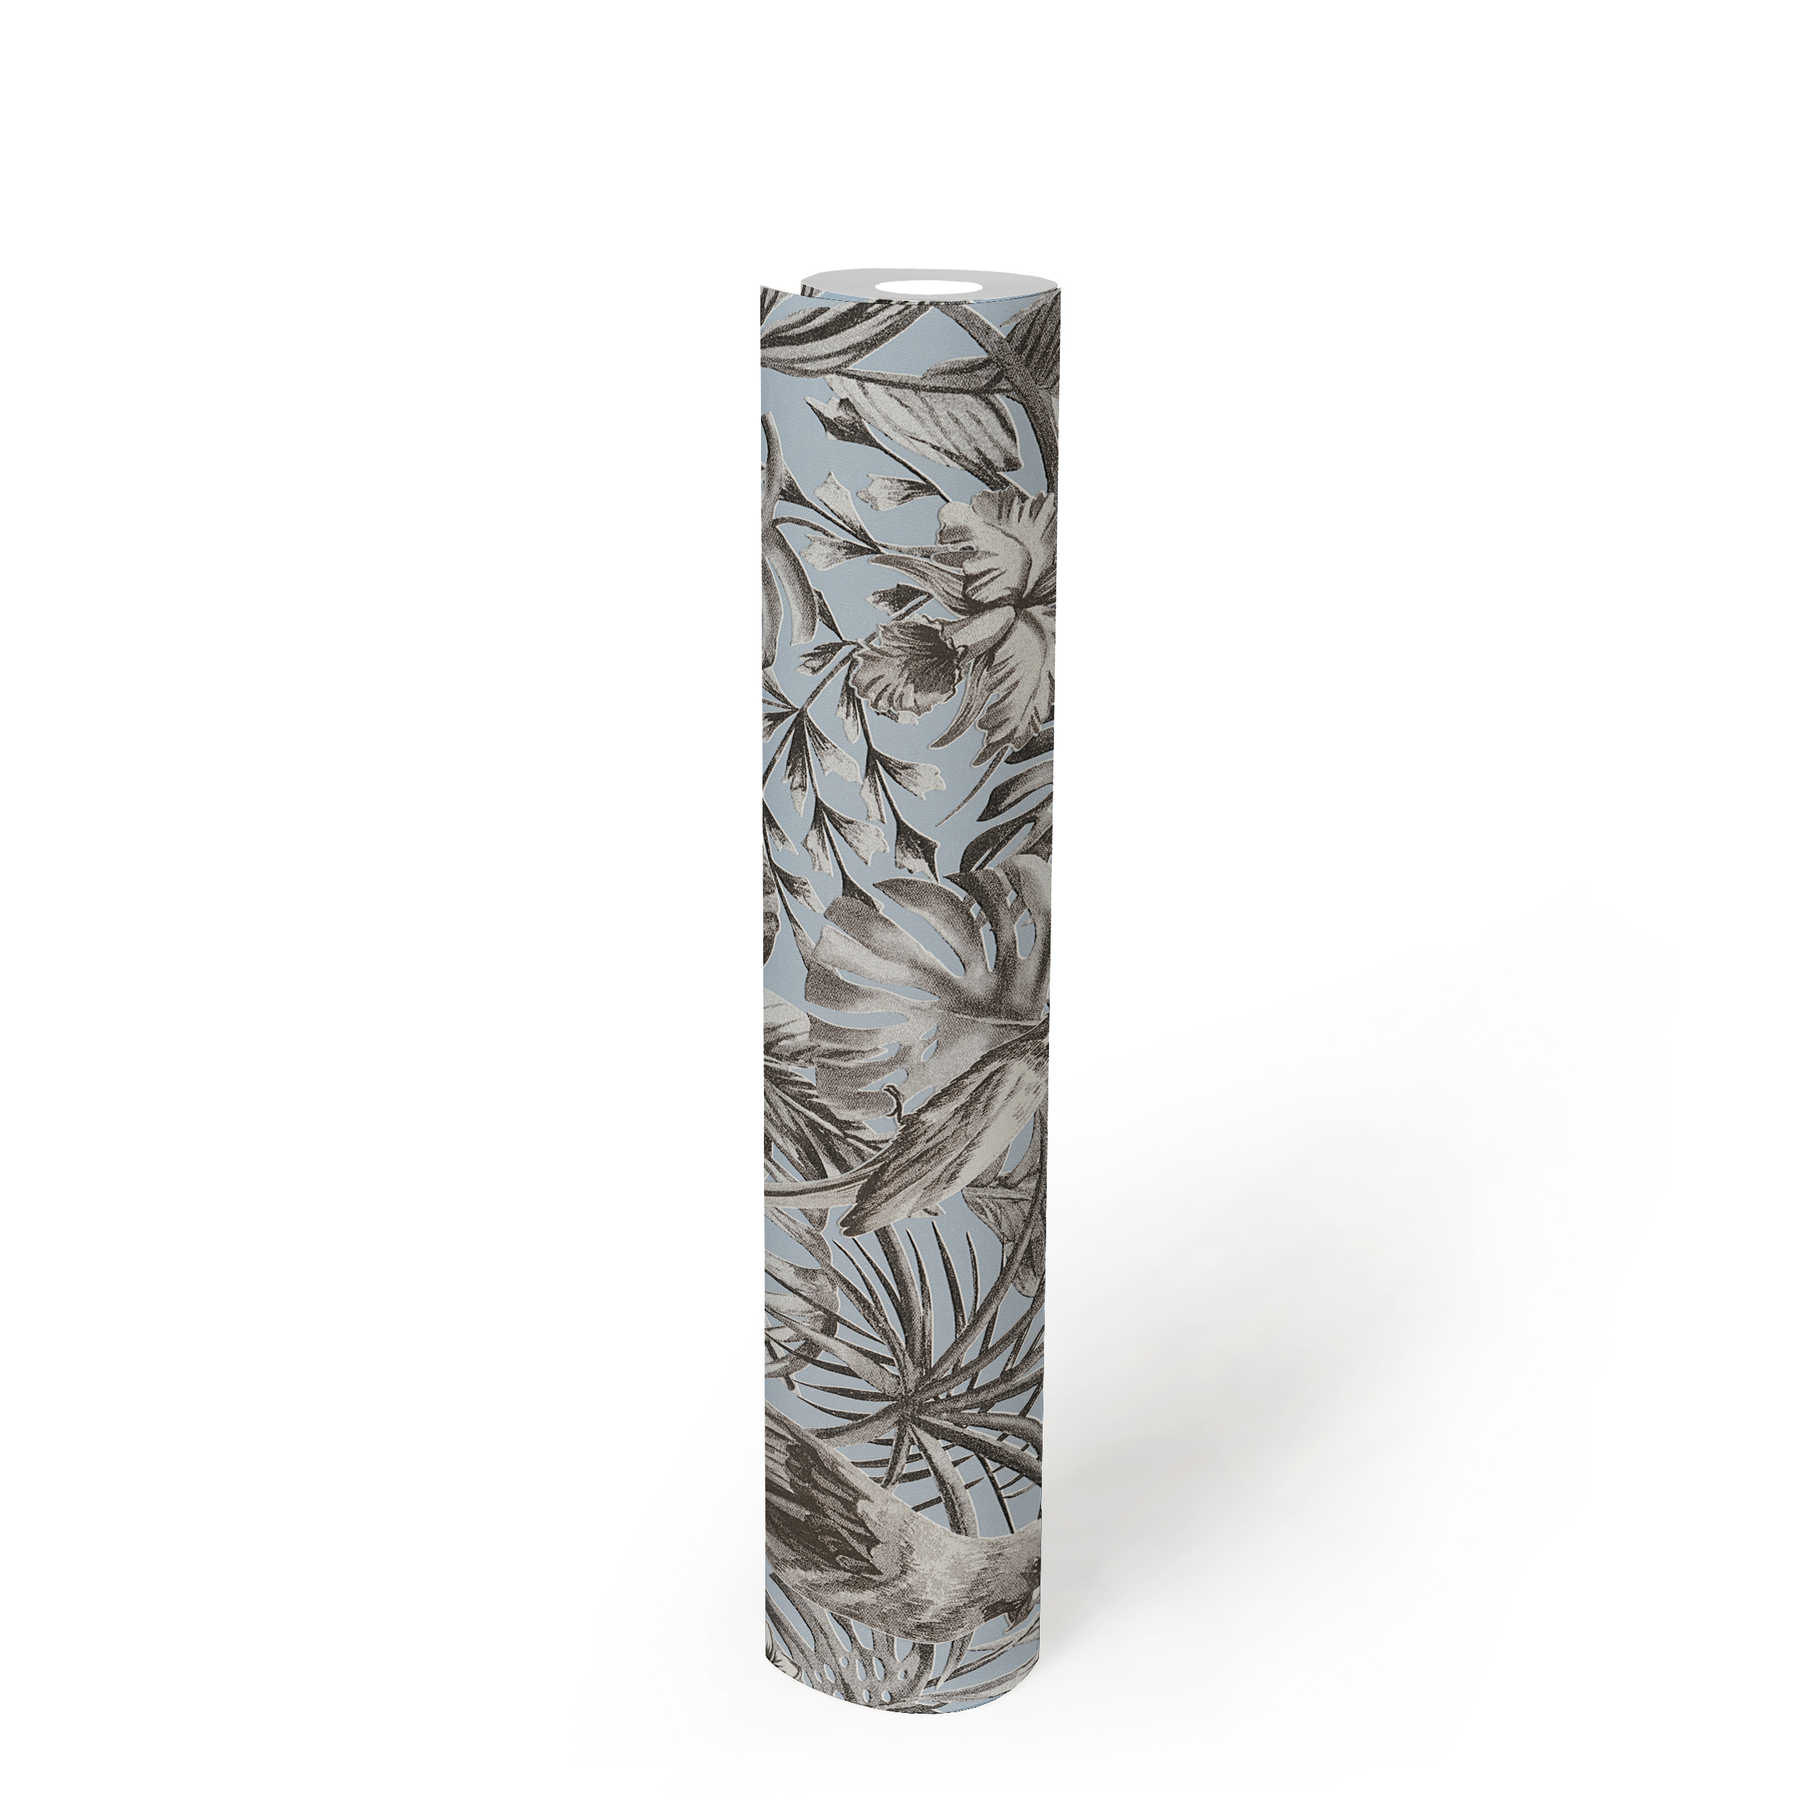             Exotic wallpaper tropical birds, flowers & leaves - grey, blue, white
        